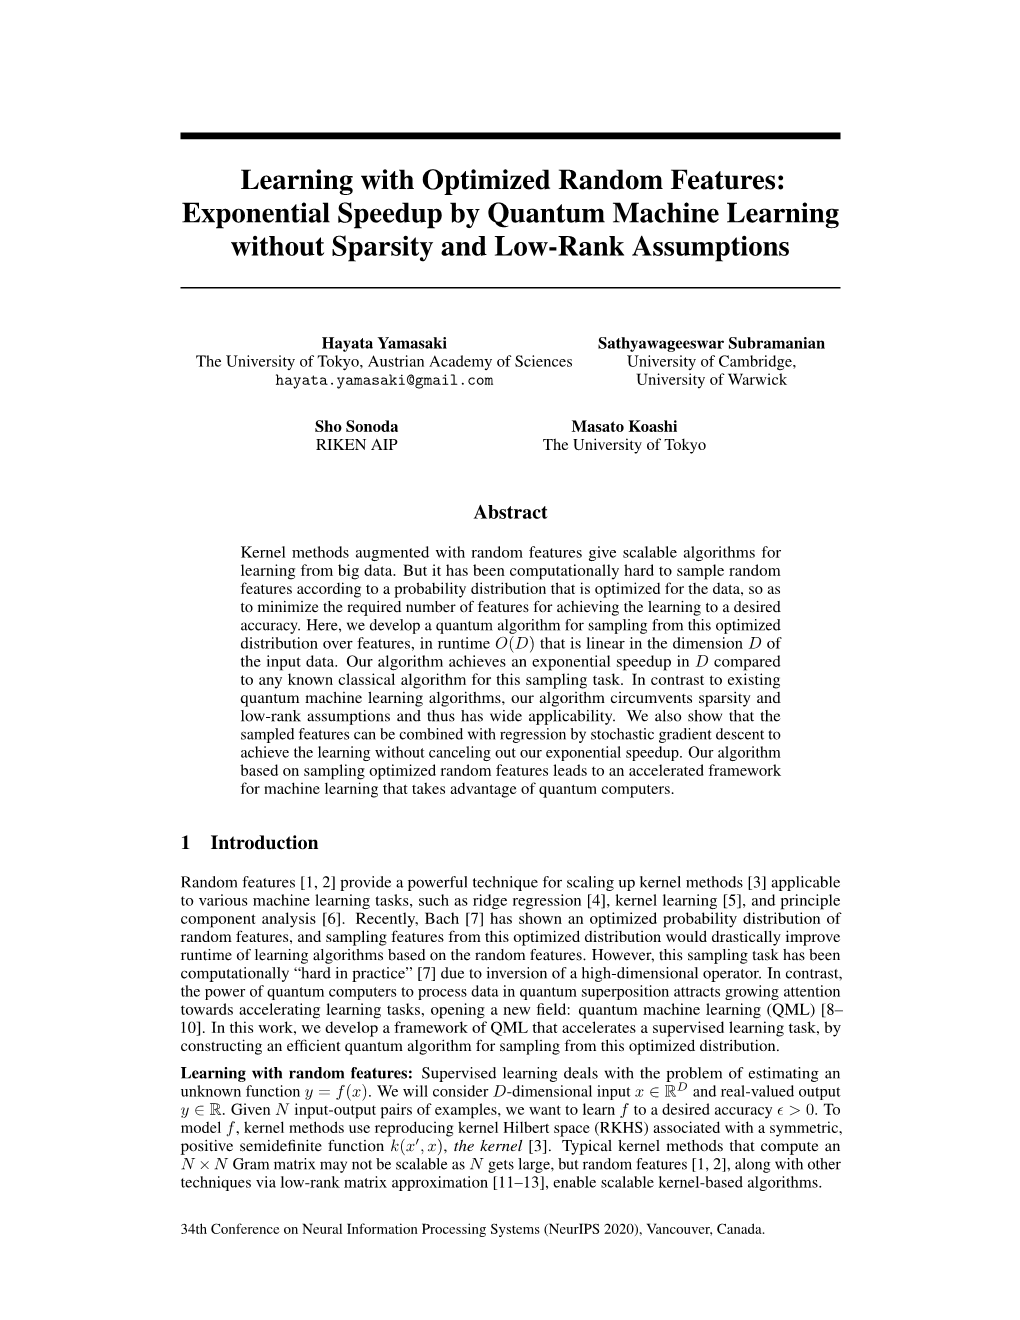 Learning with Optimized Random Features: Exponential Speedup by Quantum Machine Learning Without Sparsity and Low-Rank Assumptions